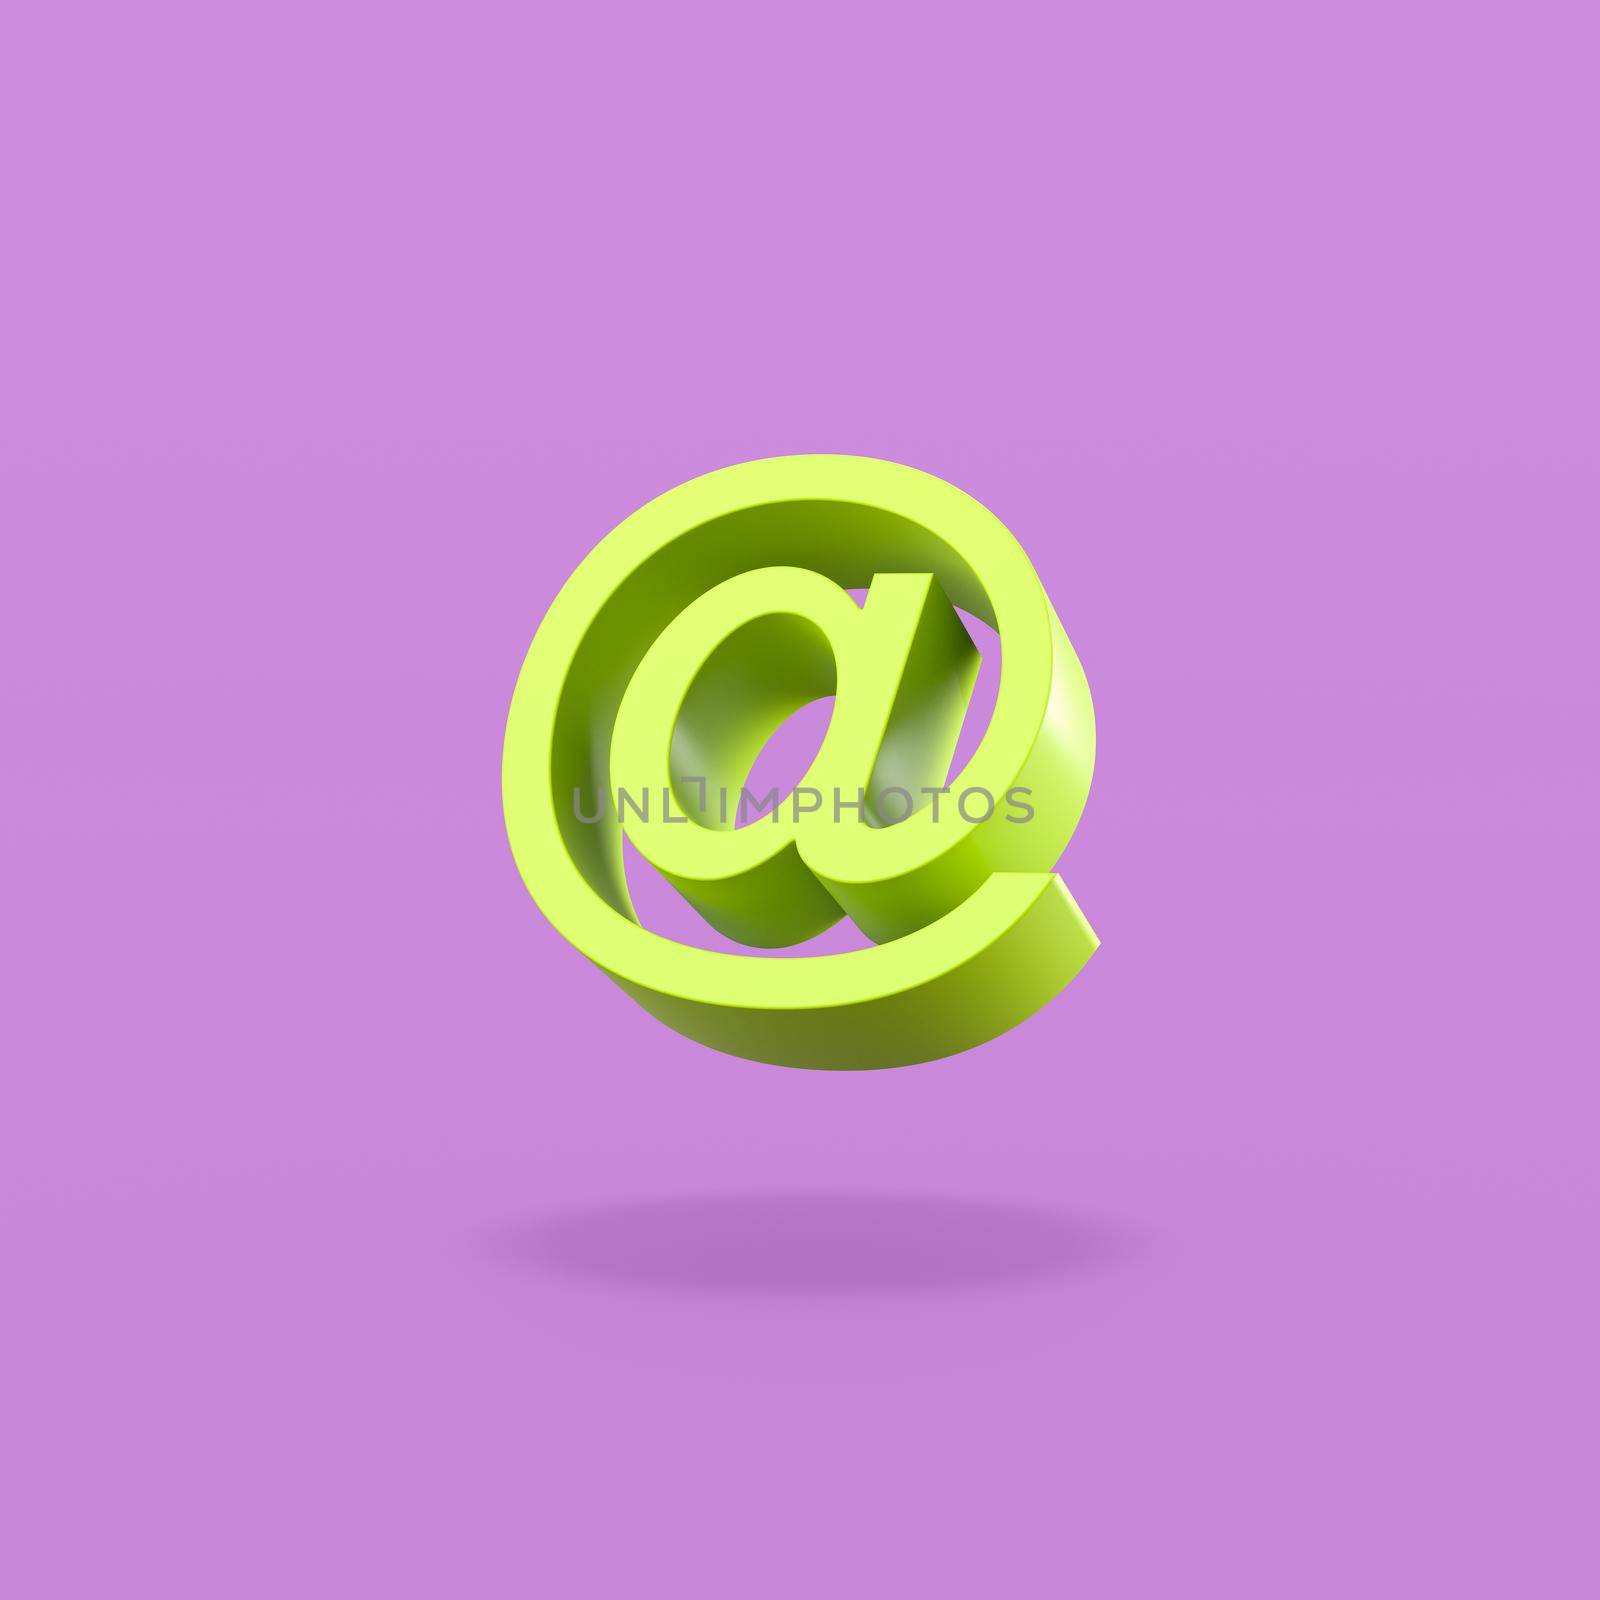 Green Email Symbol Shape on Flat Purple Background with Shadow 3D Illustration